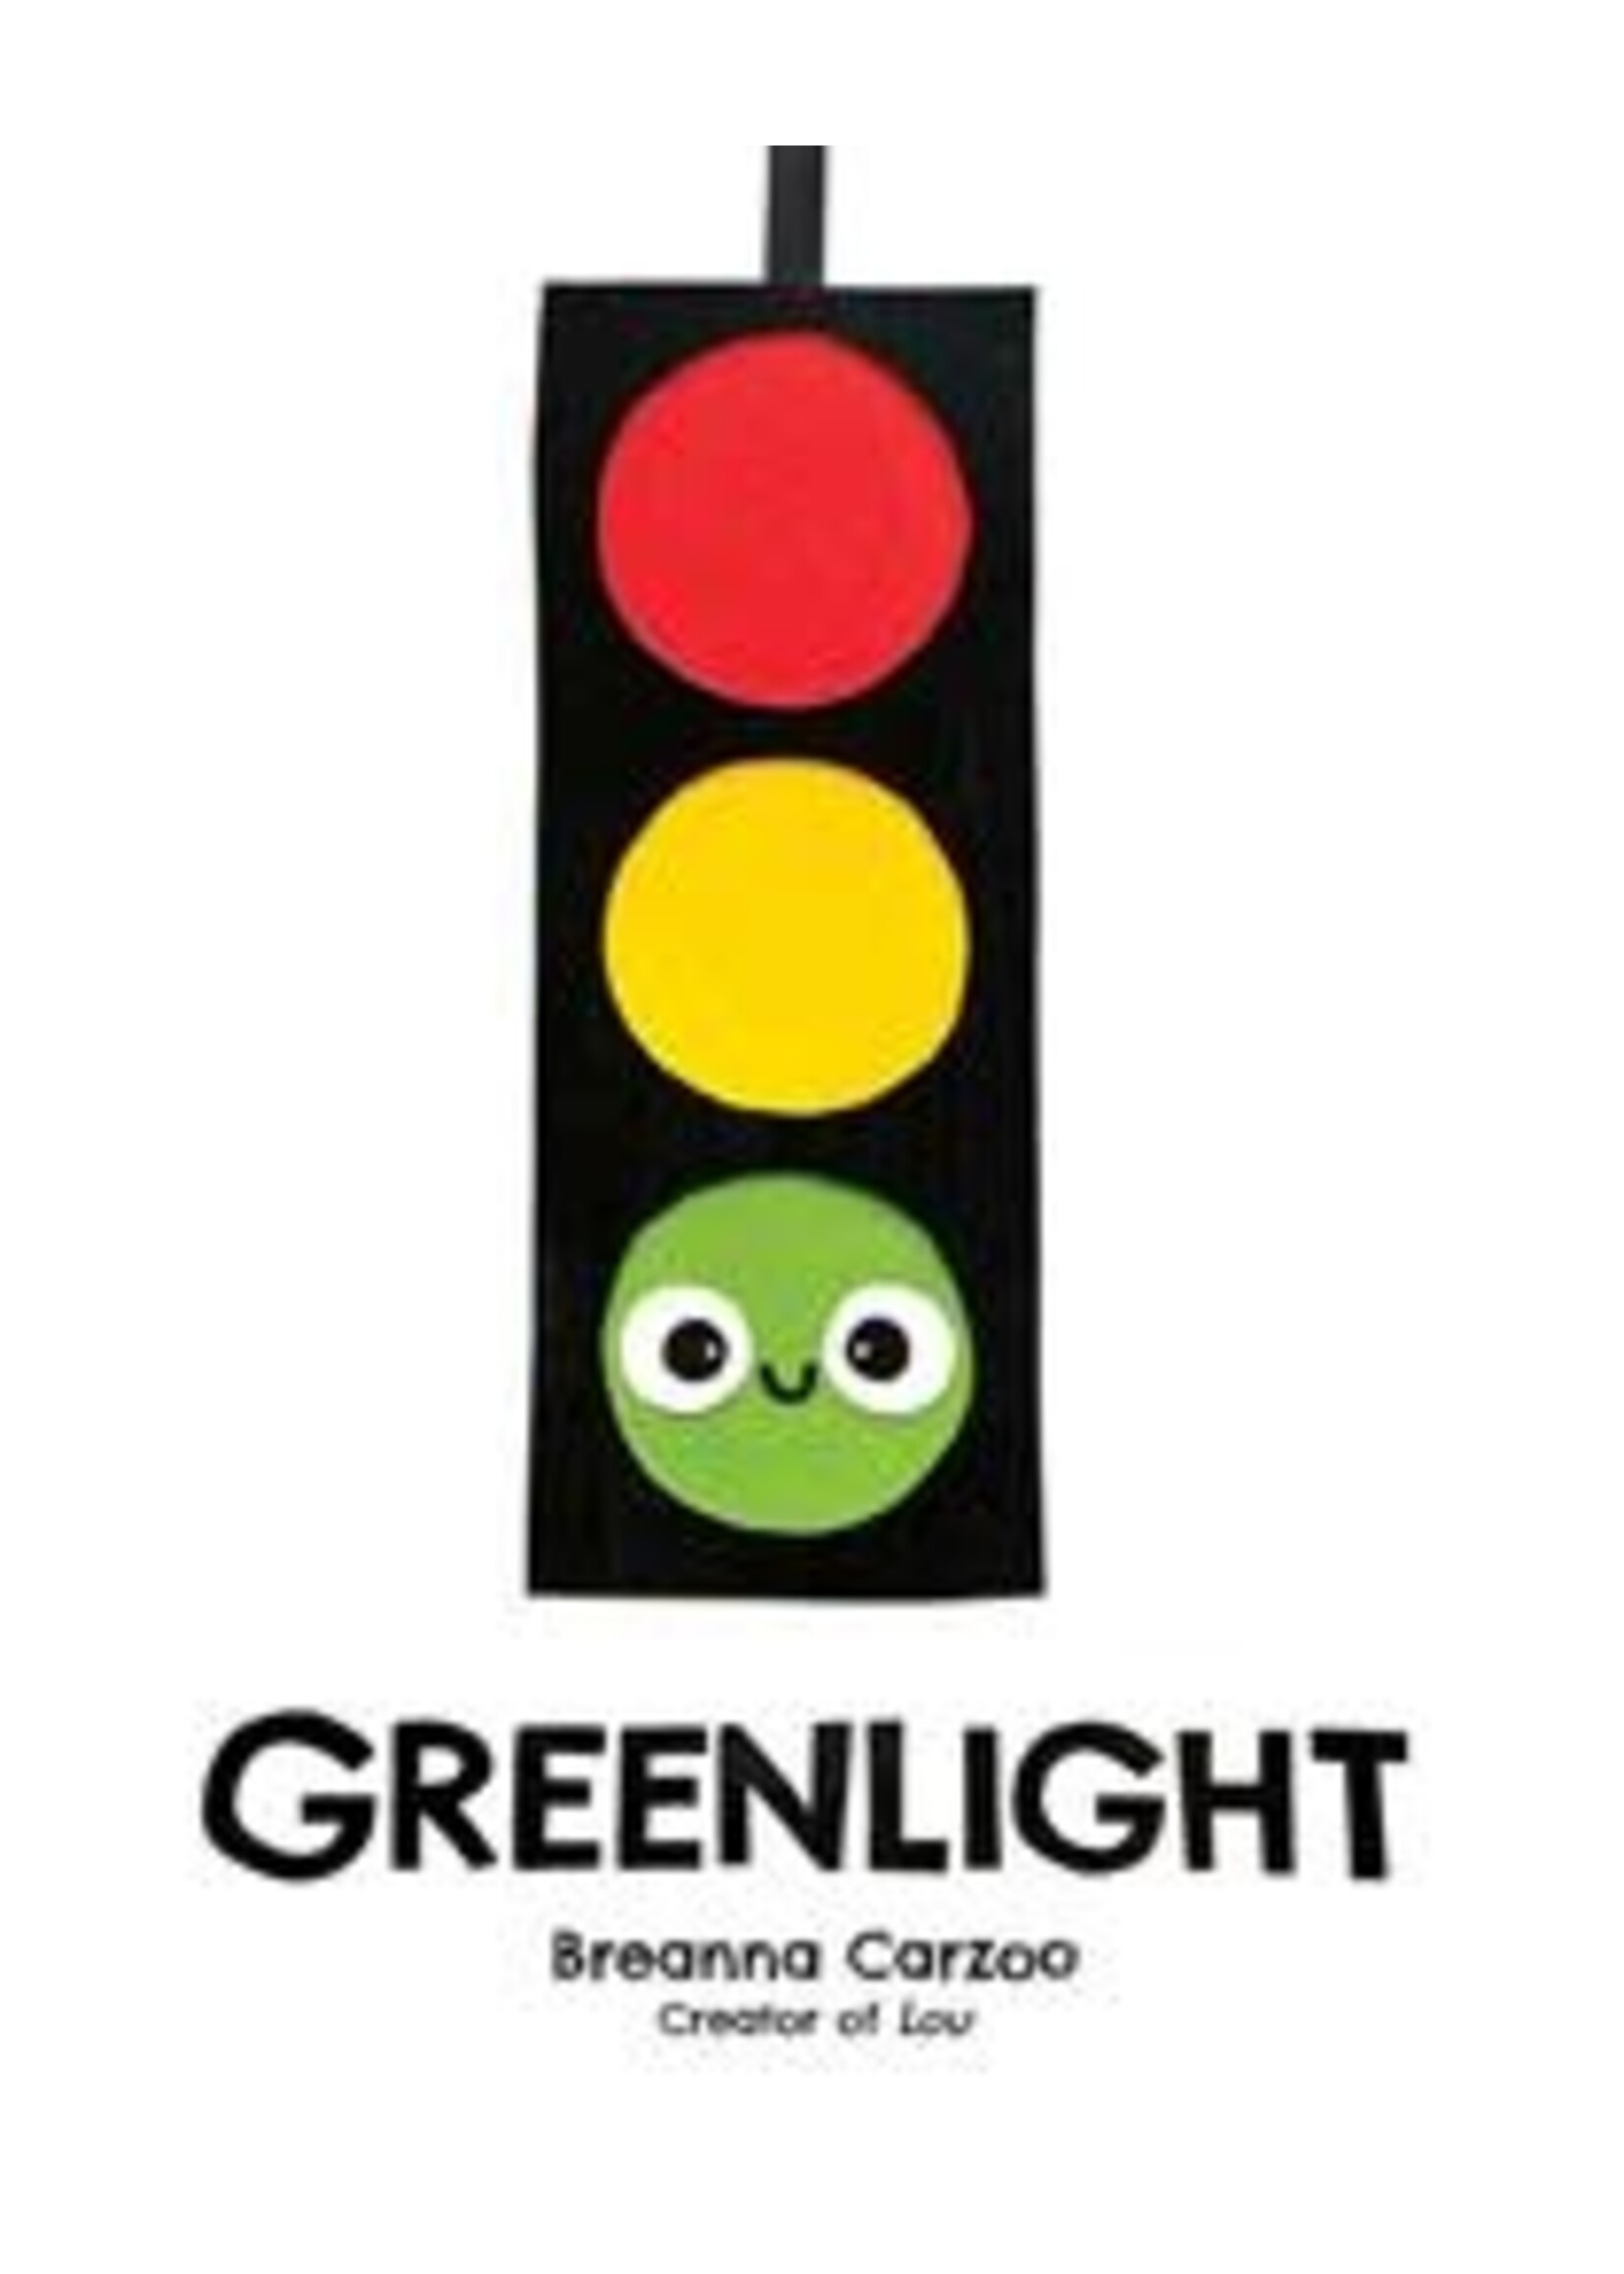 Greenlight: A Children's Picture Book About an Essential Neighborhood Traffic Light by Breanna Carzoo